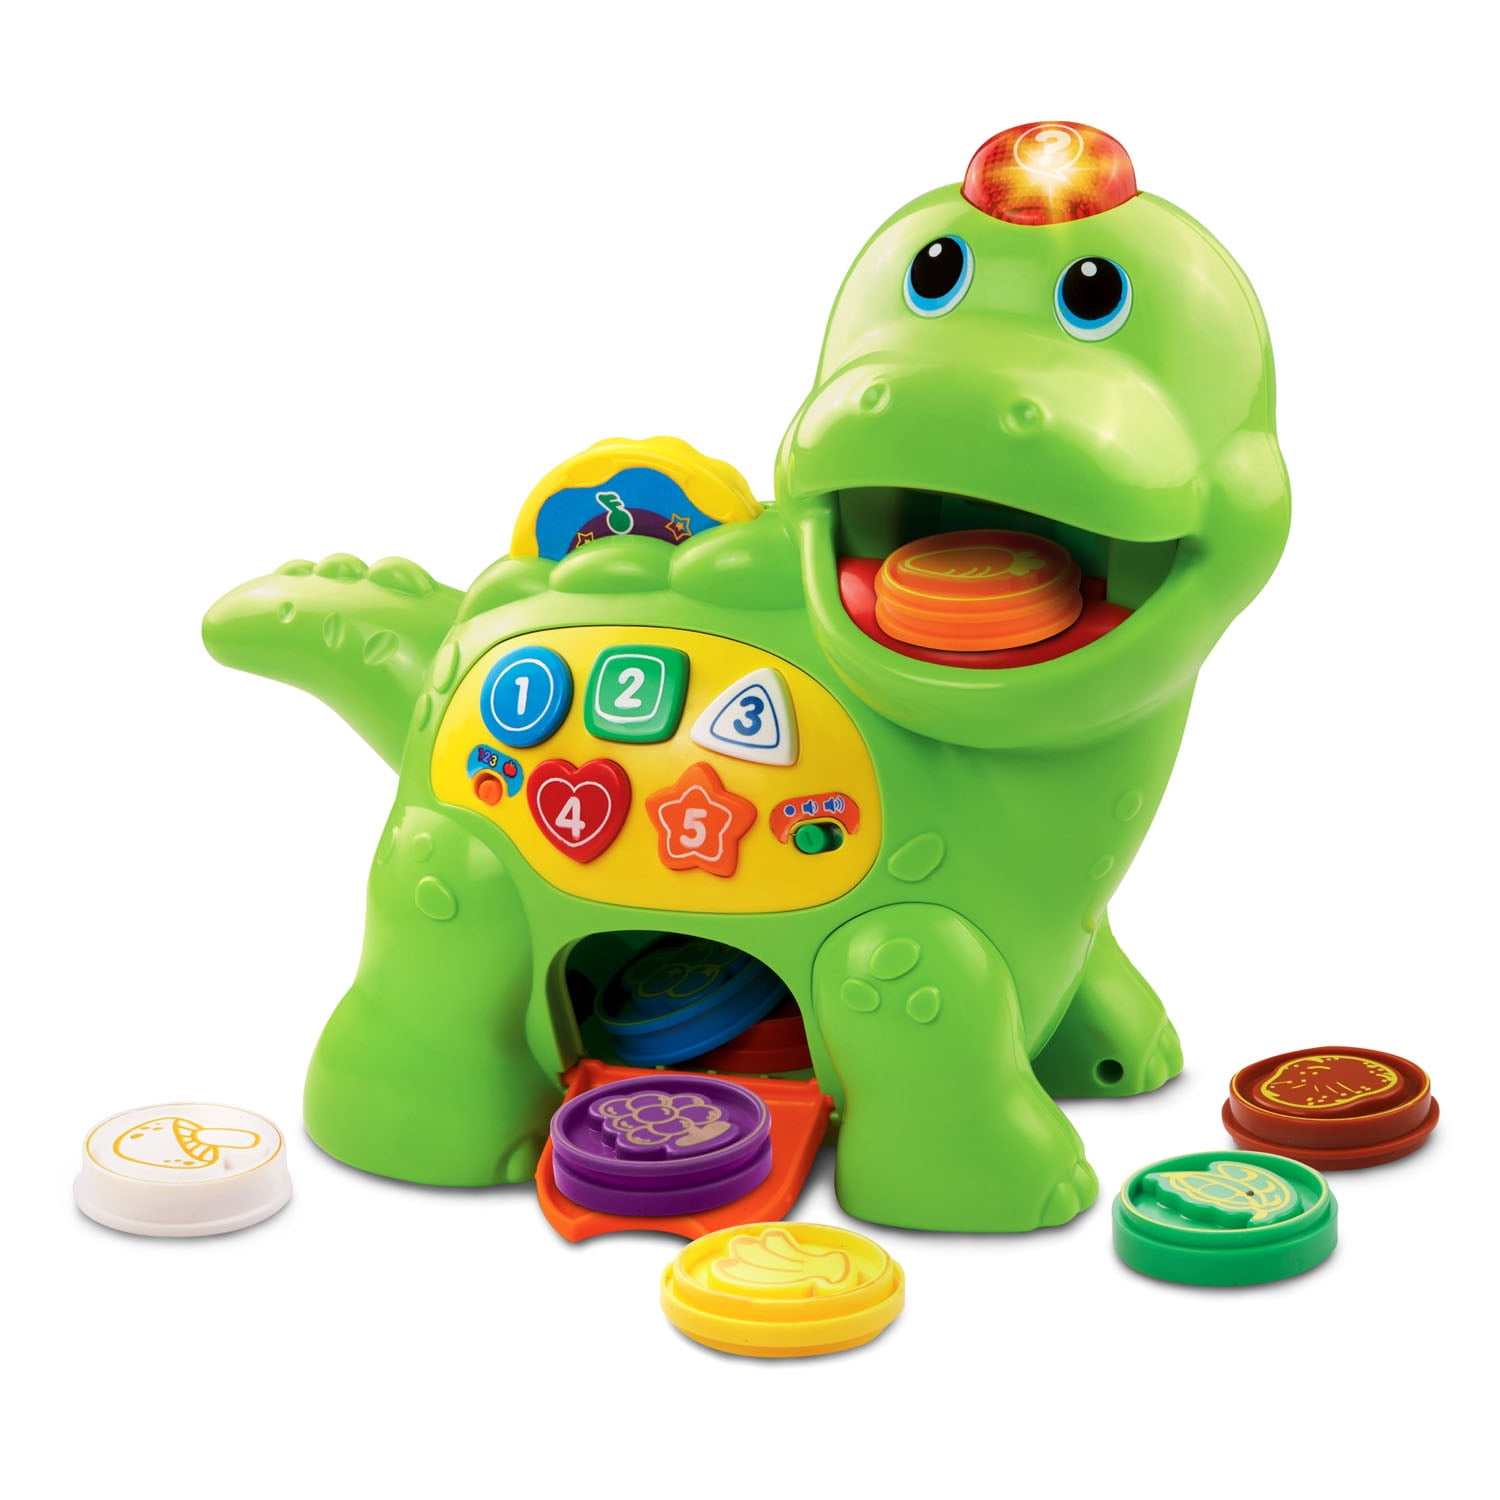 Replacement Foodpieces Coins/Discs for VTech Chomp and Count Dino Toy new in box